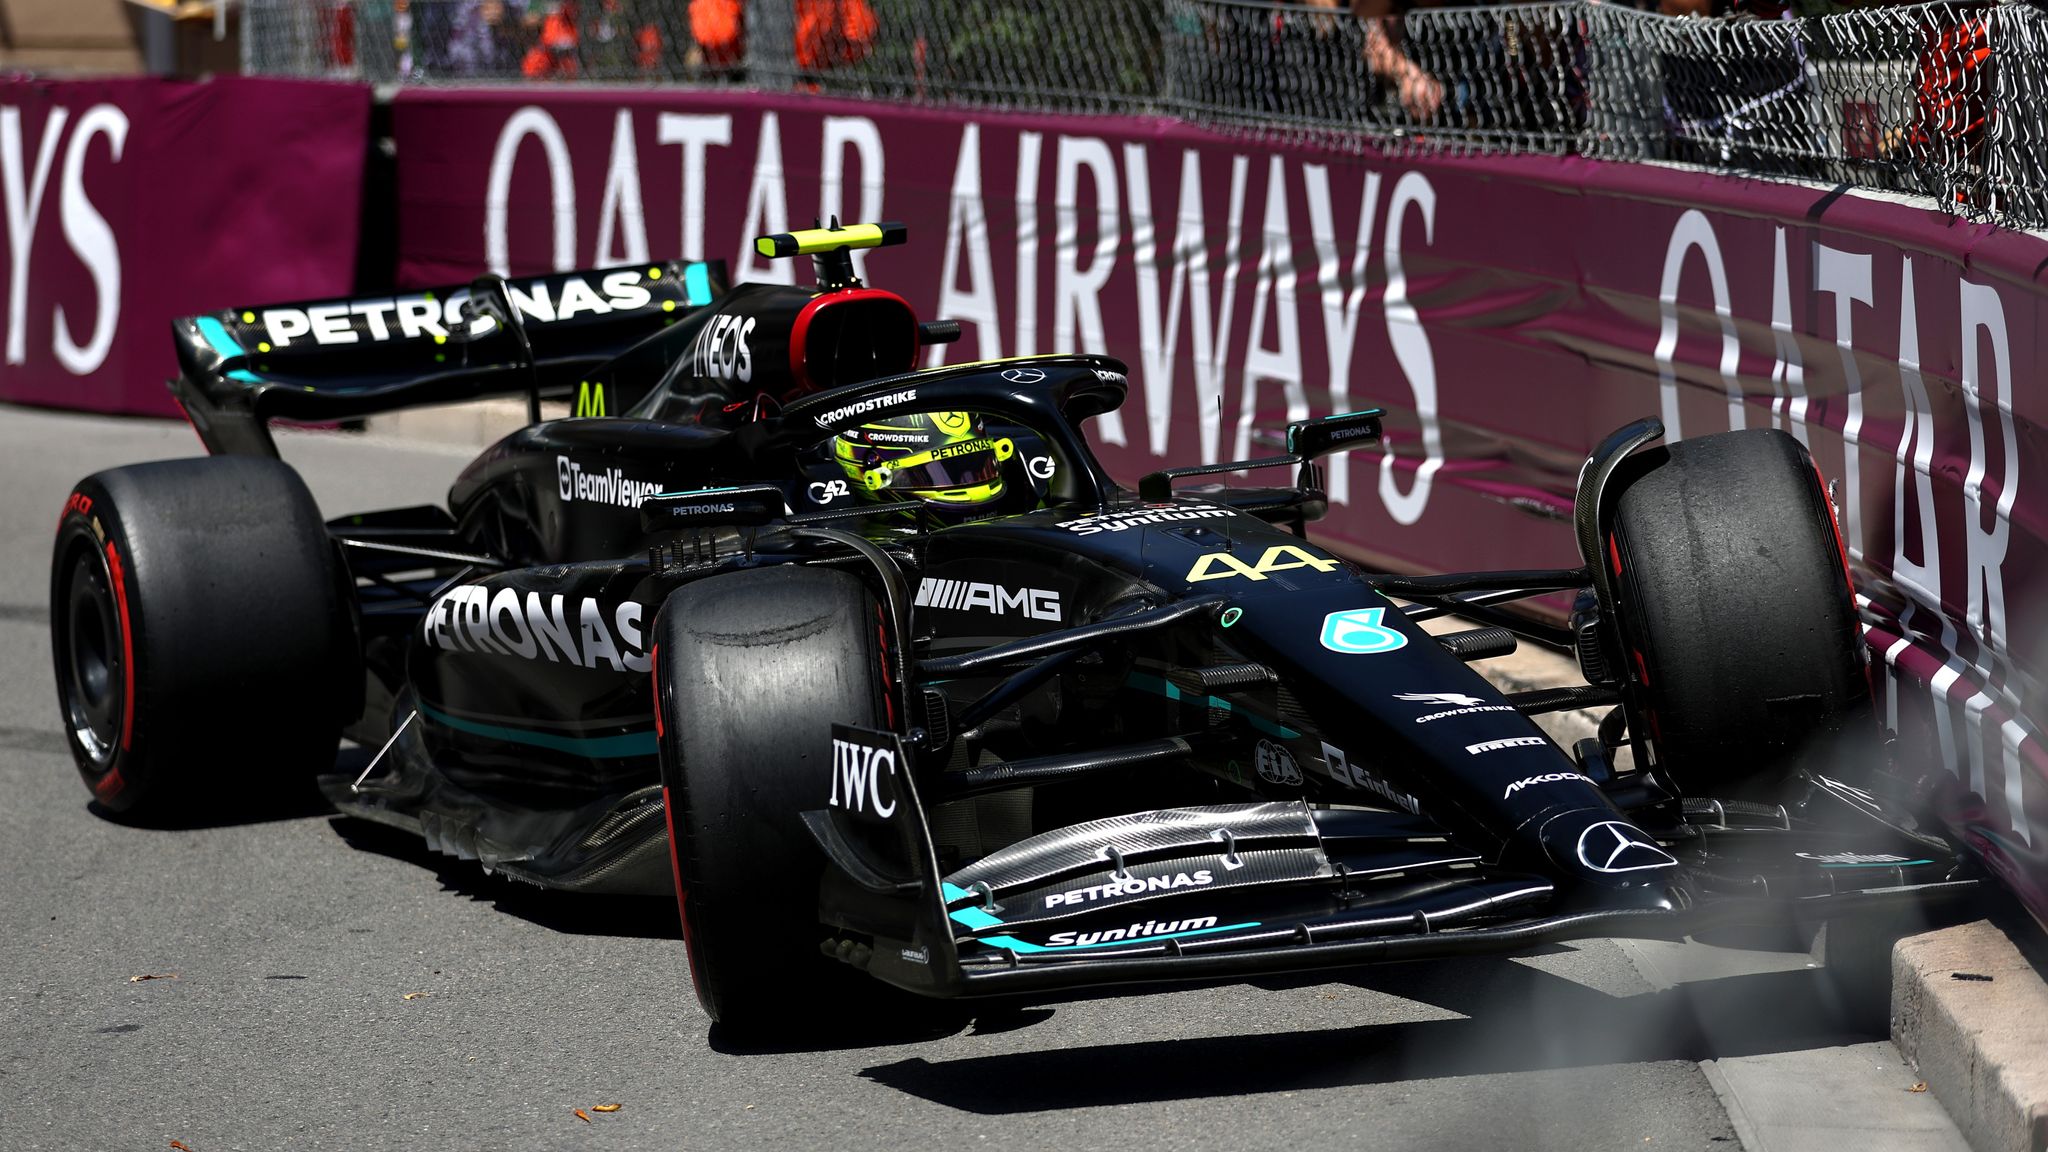 Monaco GP Max Verstappen tops final practice as Lewis Hamilton crashes ahead of qualifying F1 News